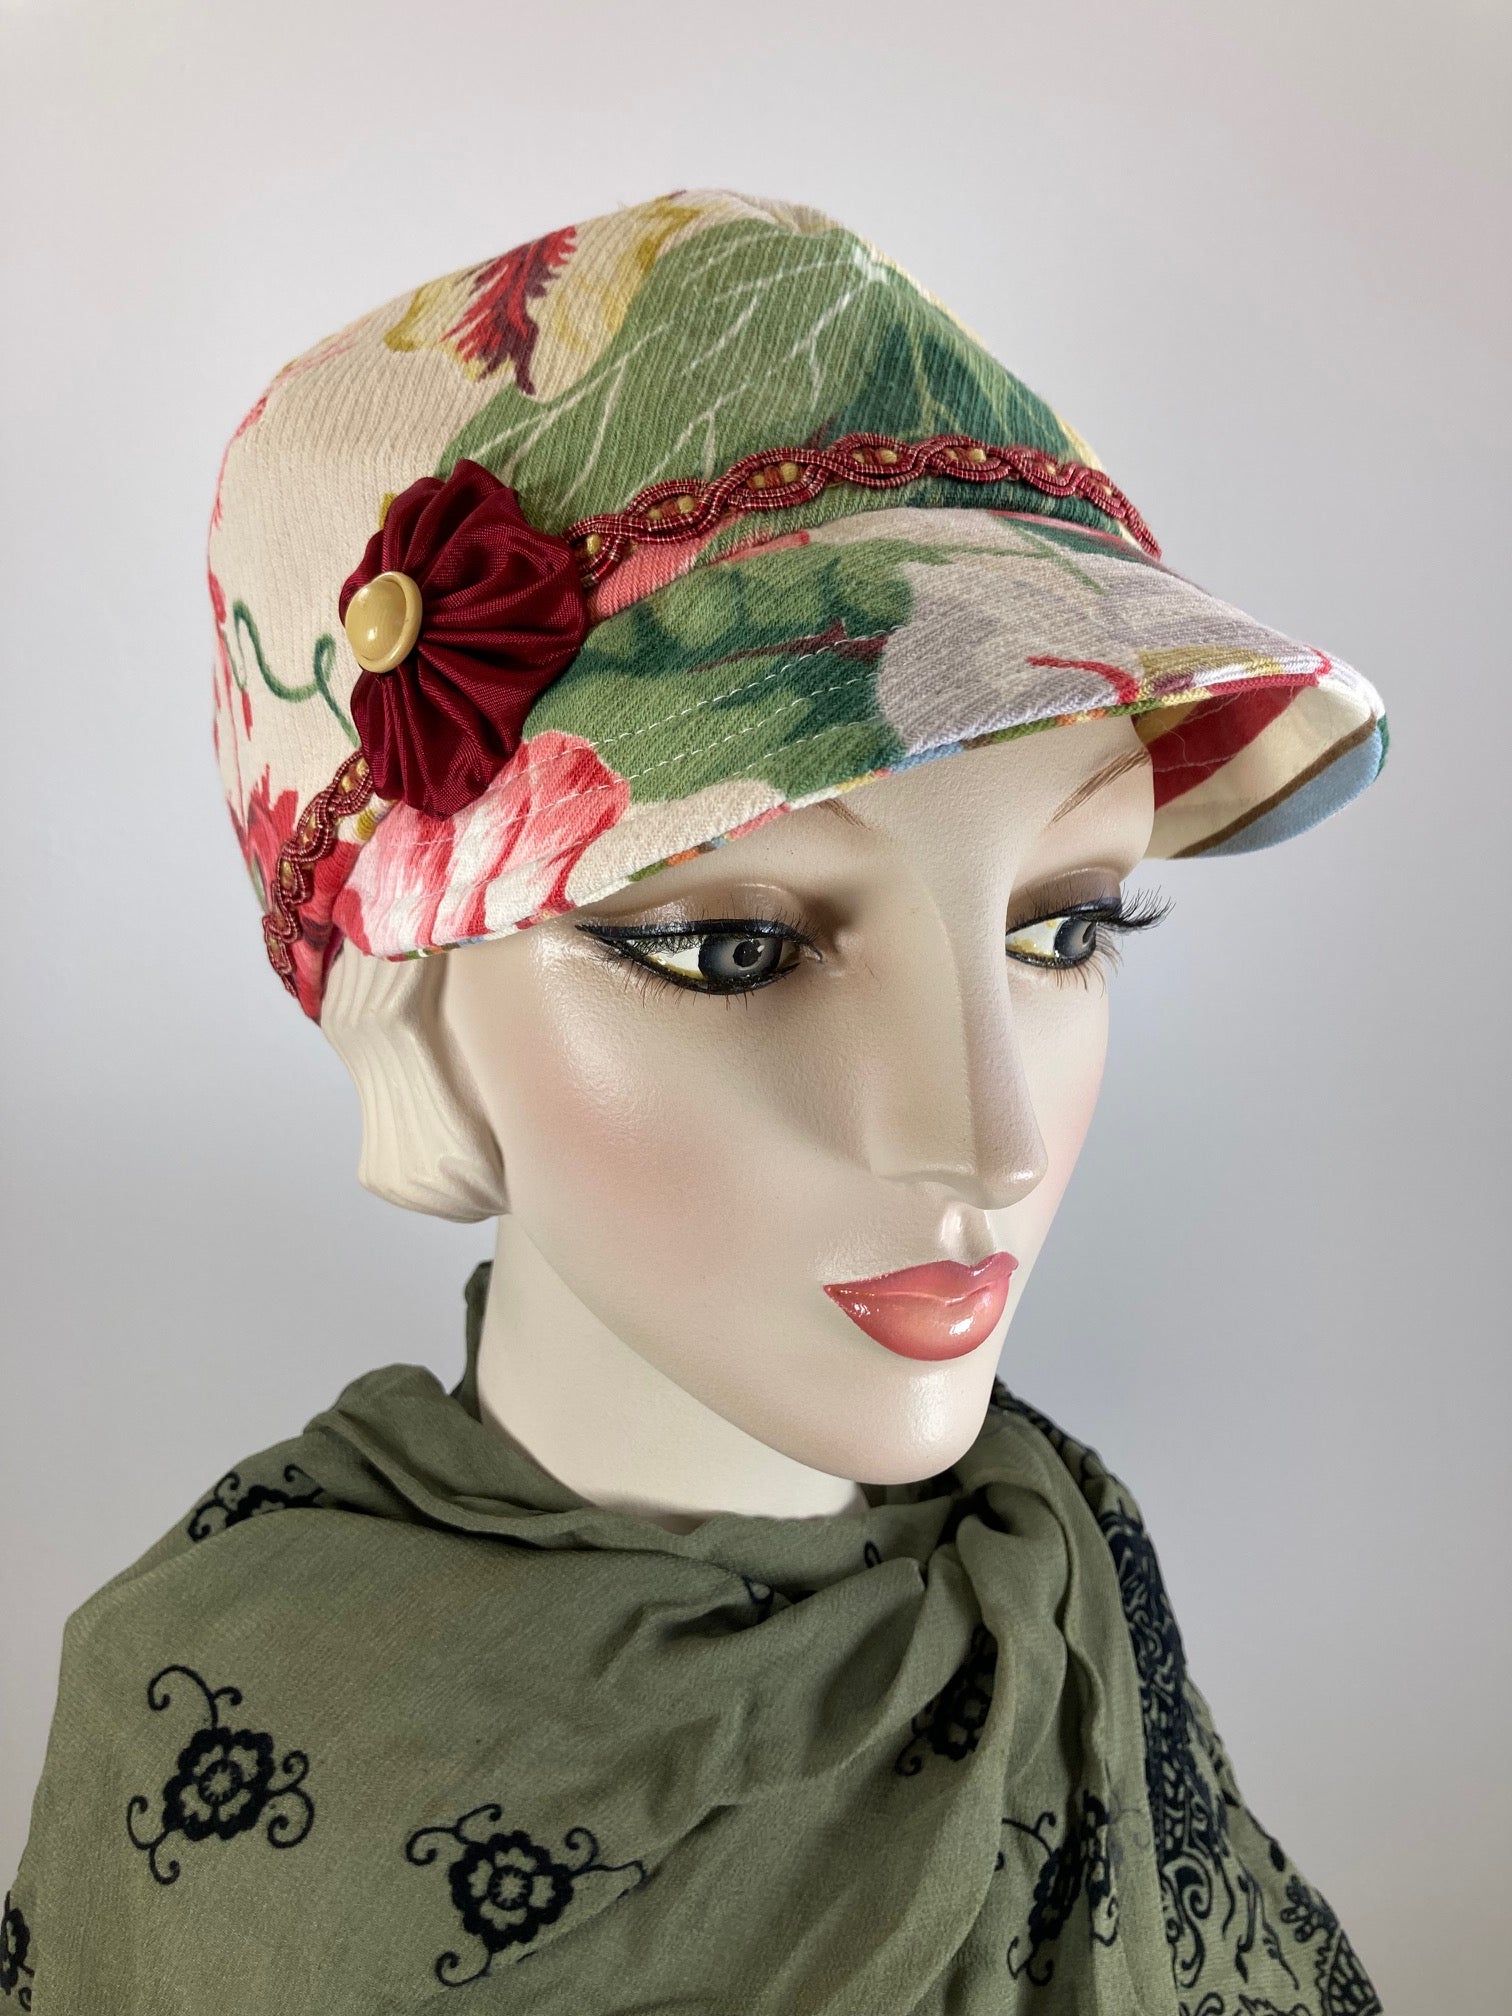 Women's comfy summer baseball style hat. Floral casual vintage fabric newsboy hat gold, green, pink, blue. Ladies unique soft travel hat.